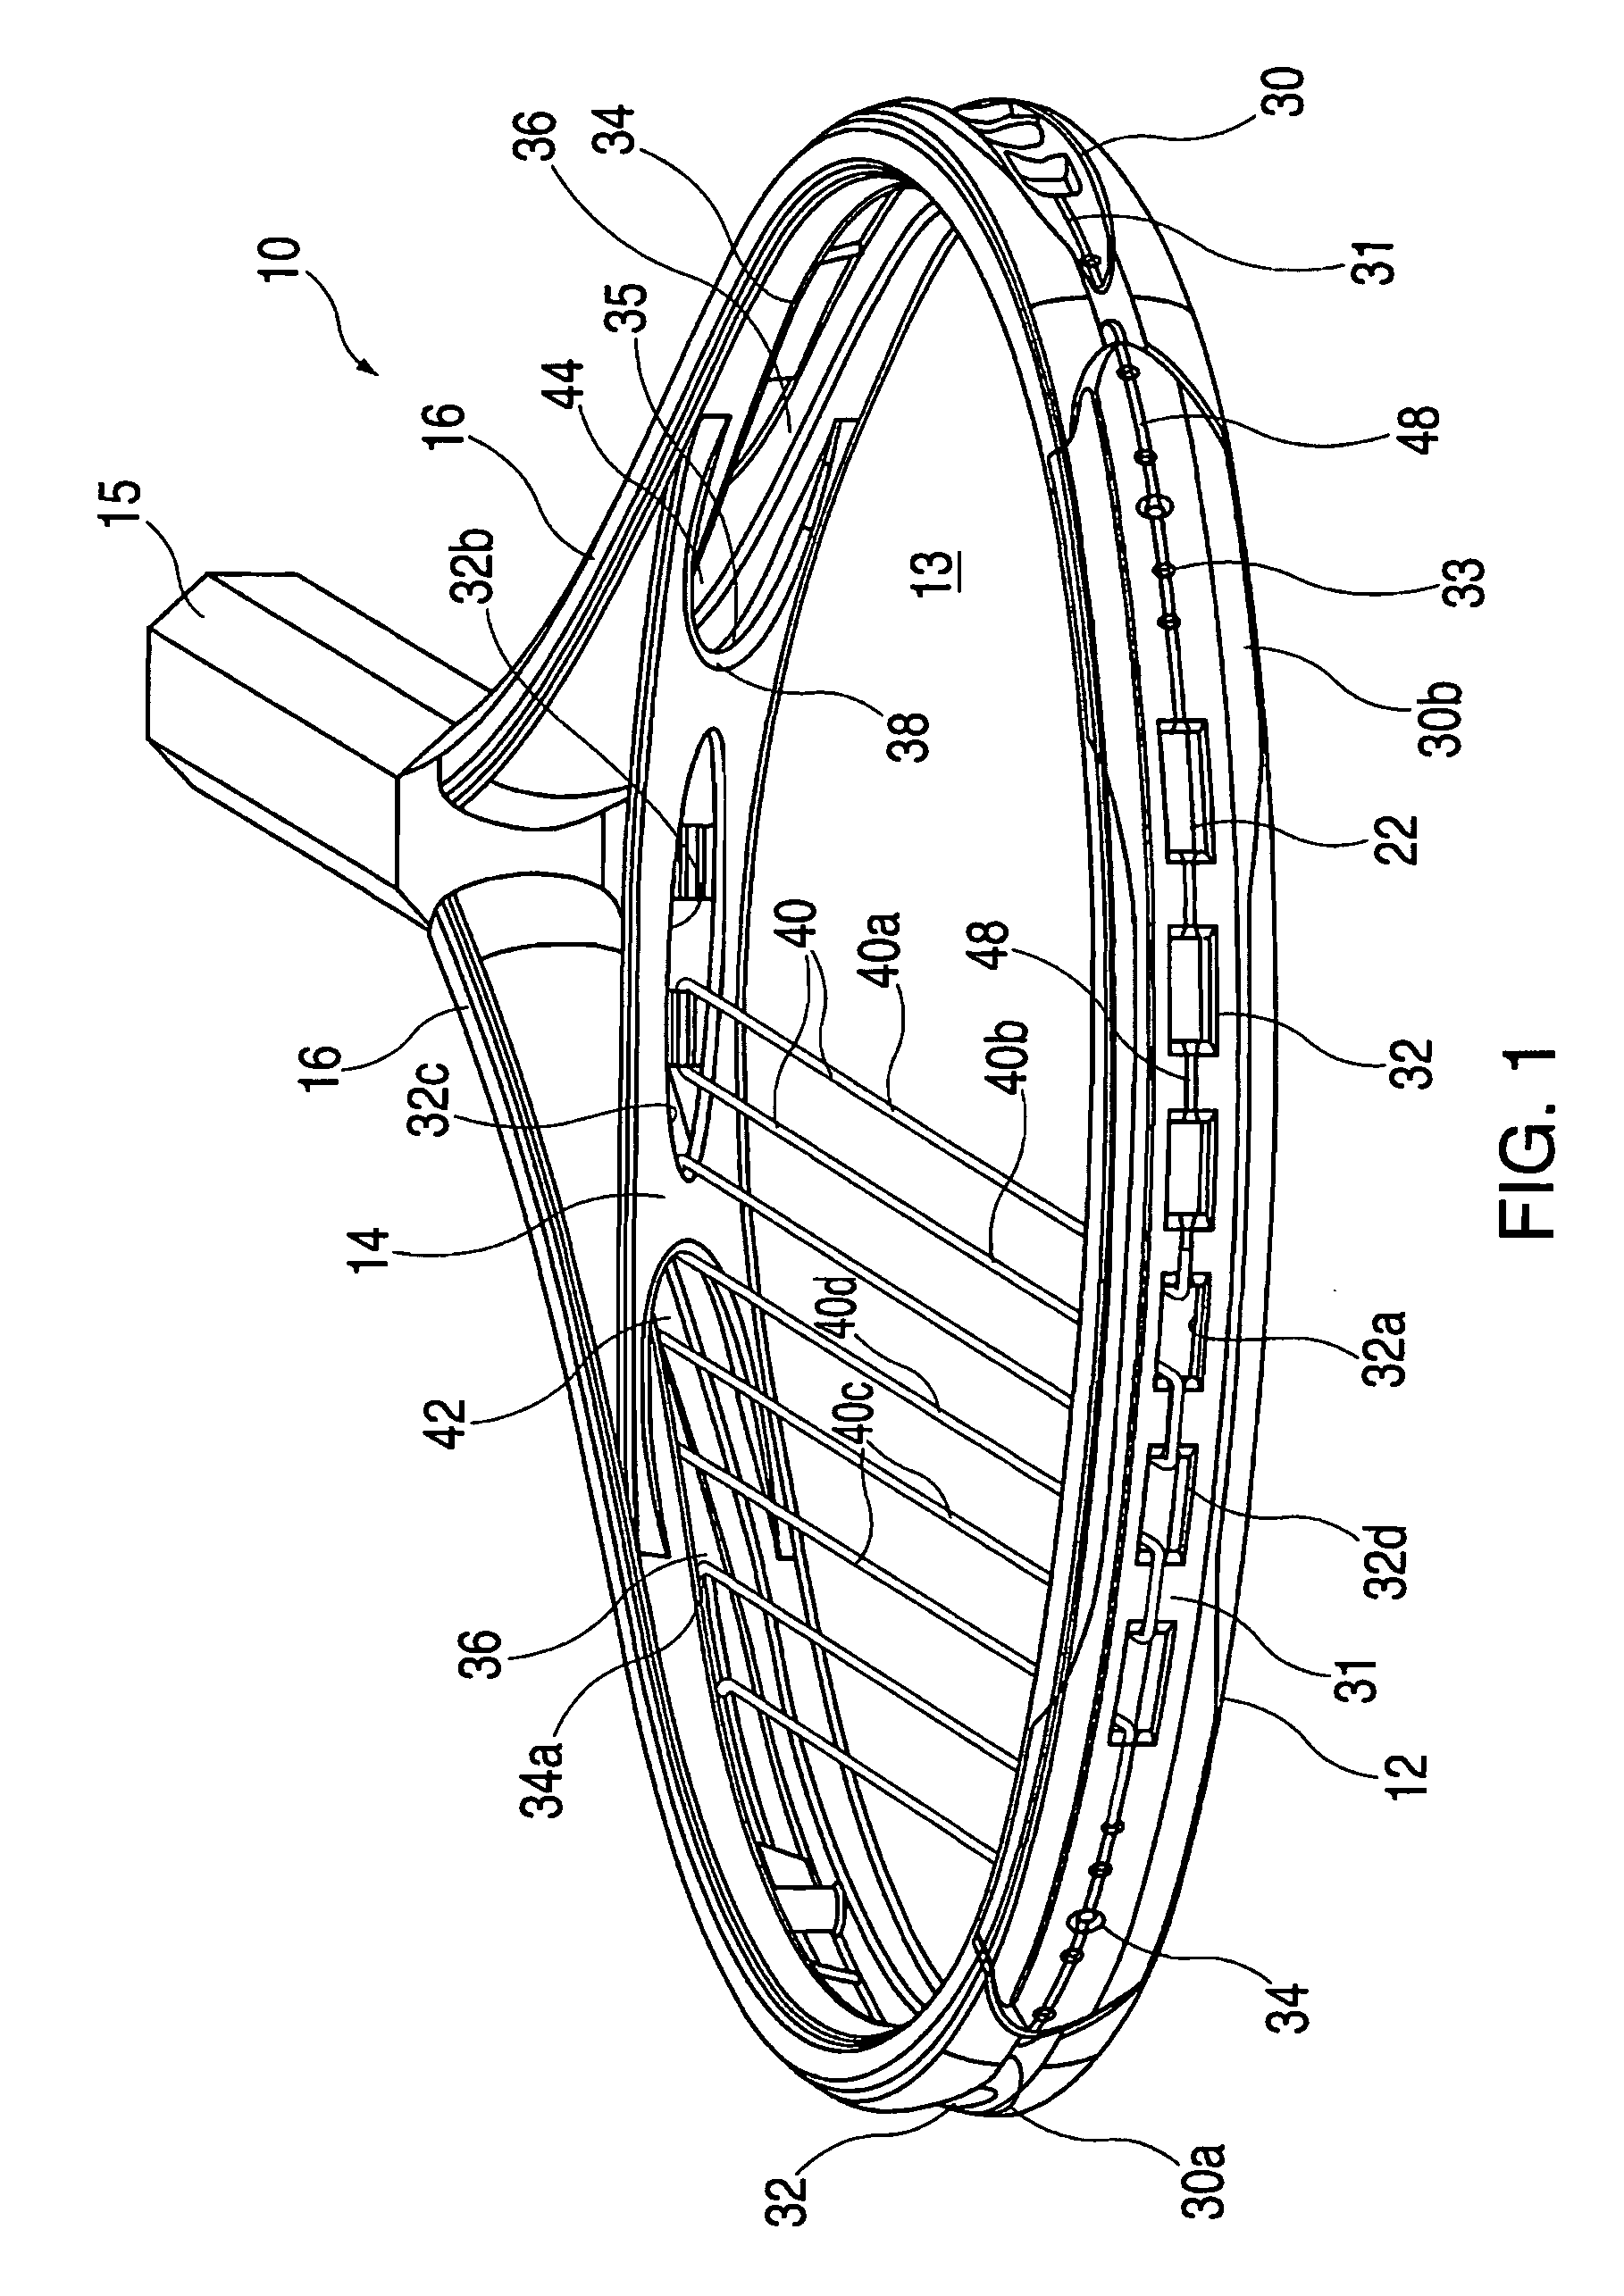 Sports racquet with insert members for anchoring strings